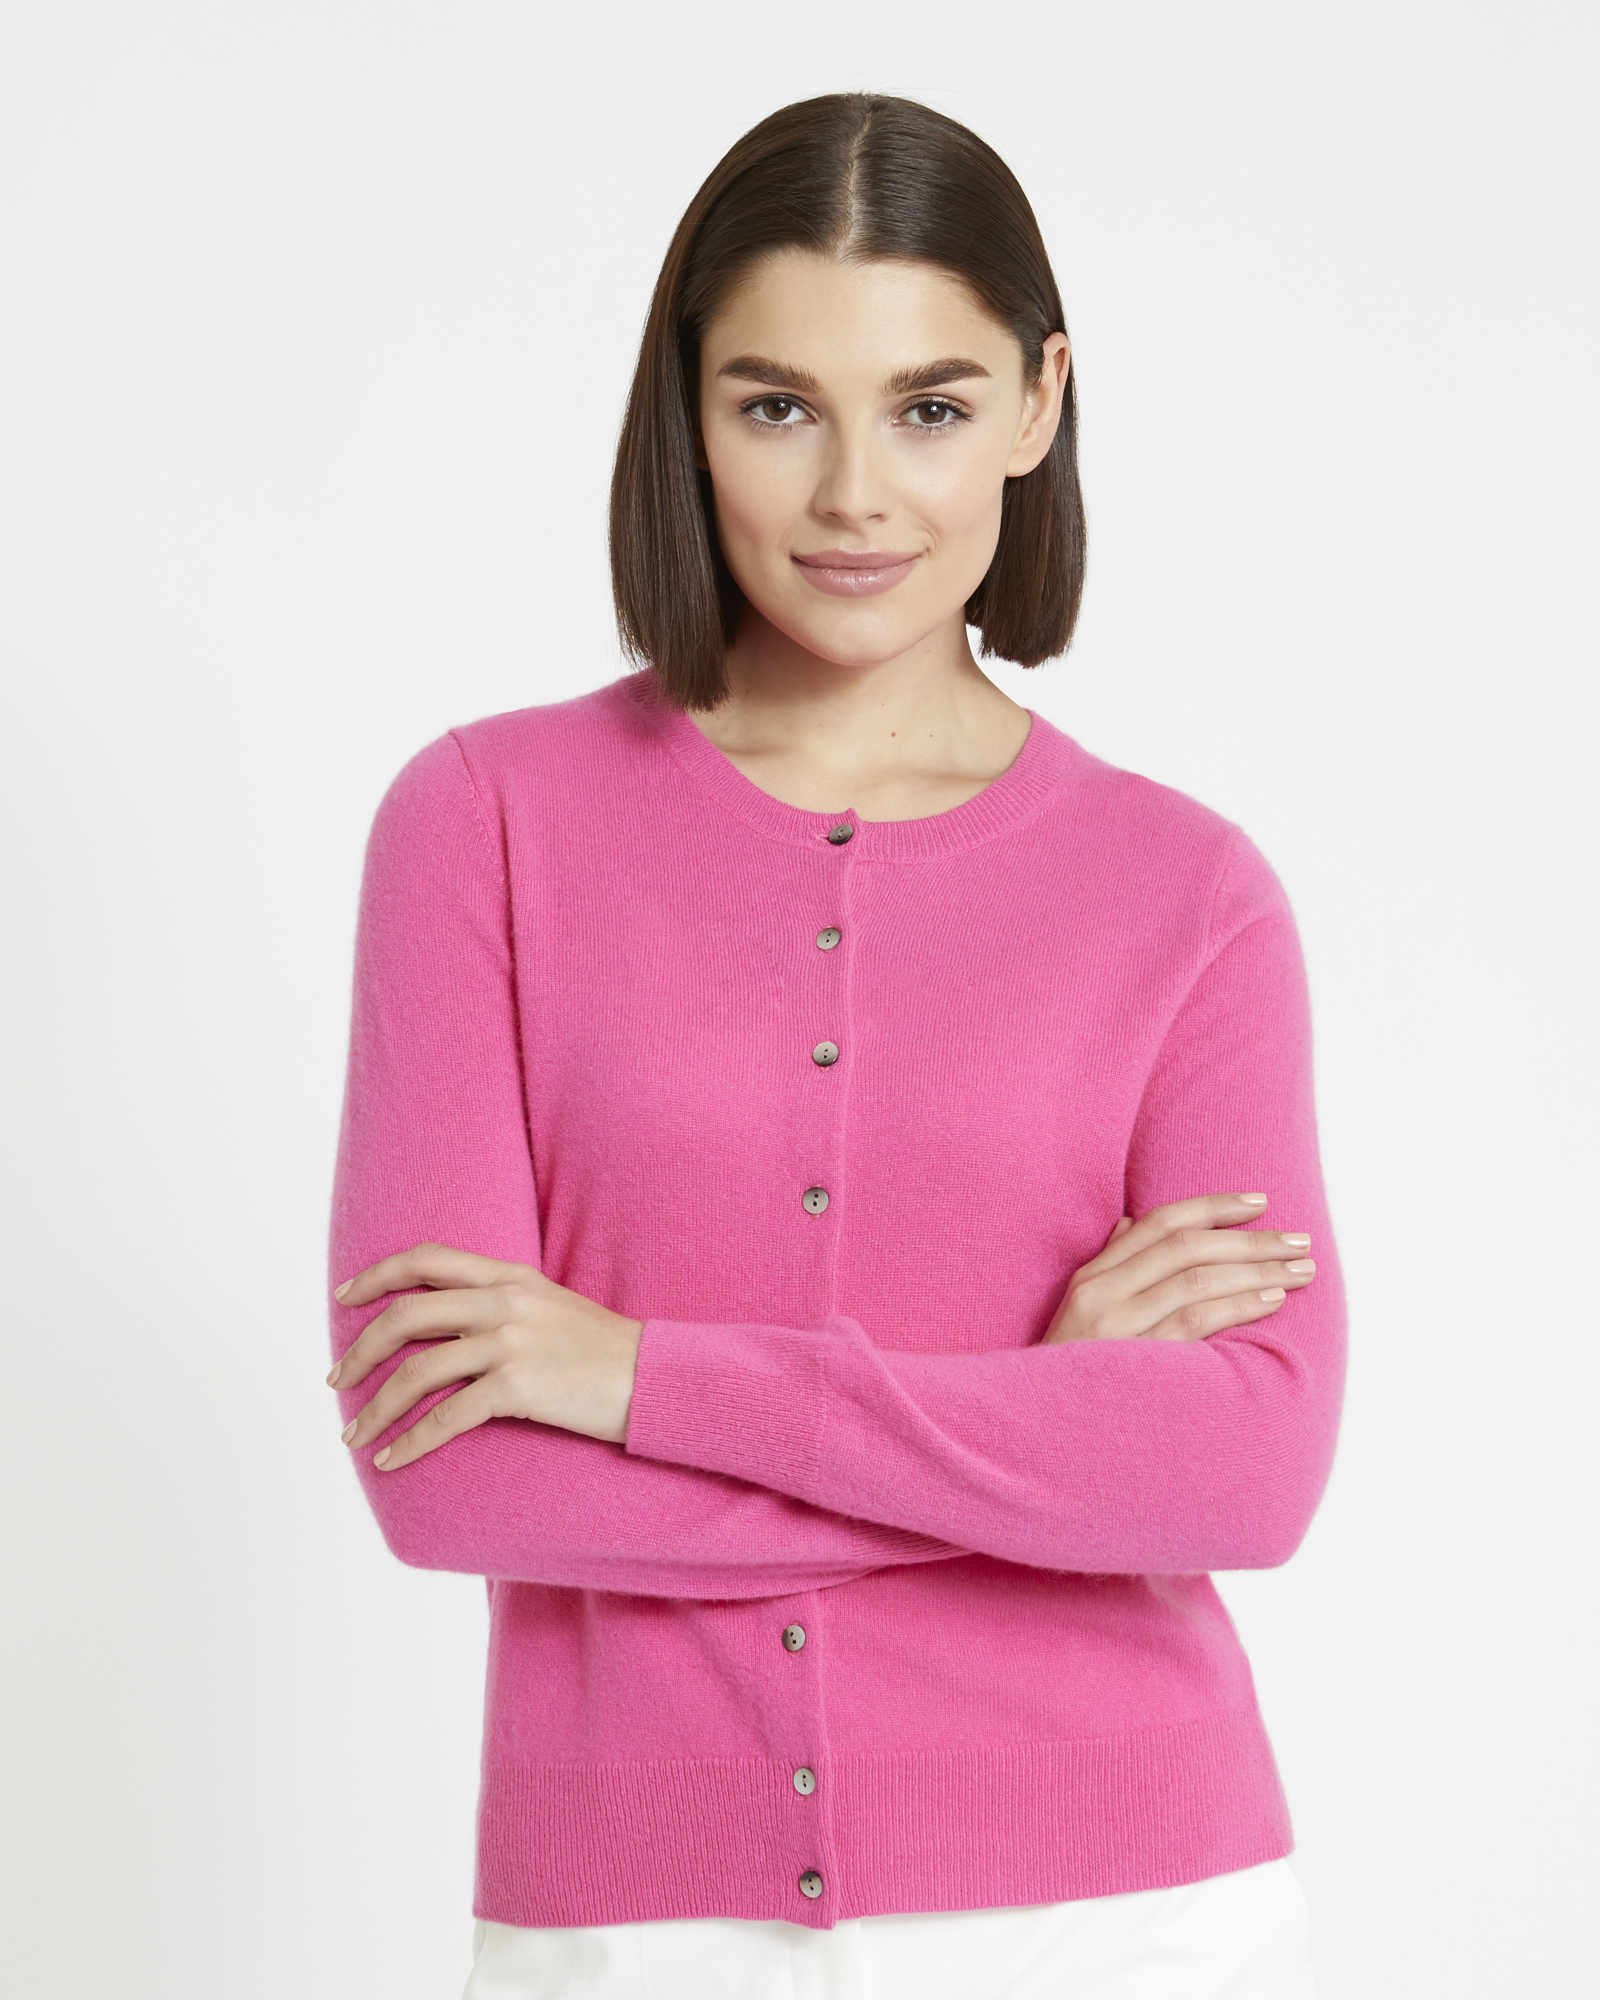 Peony Pink, Cashmere Cowl Neck Sweater